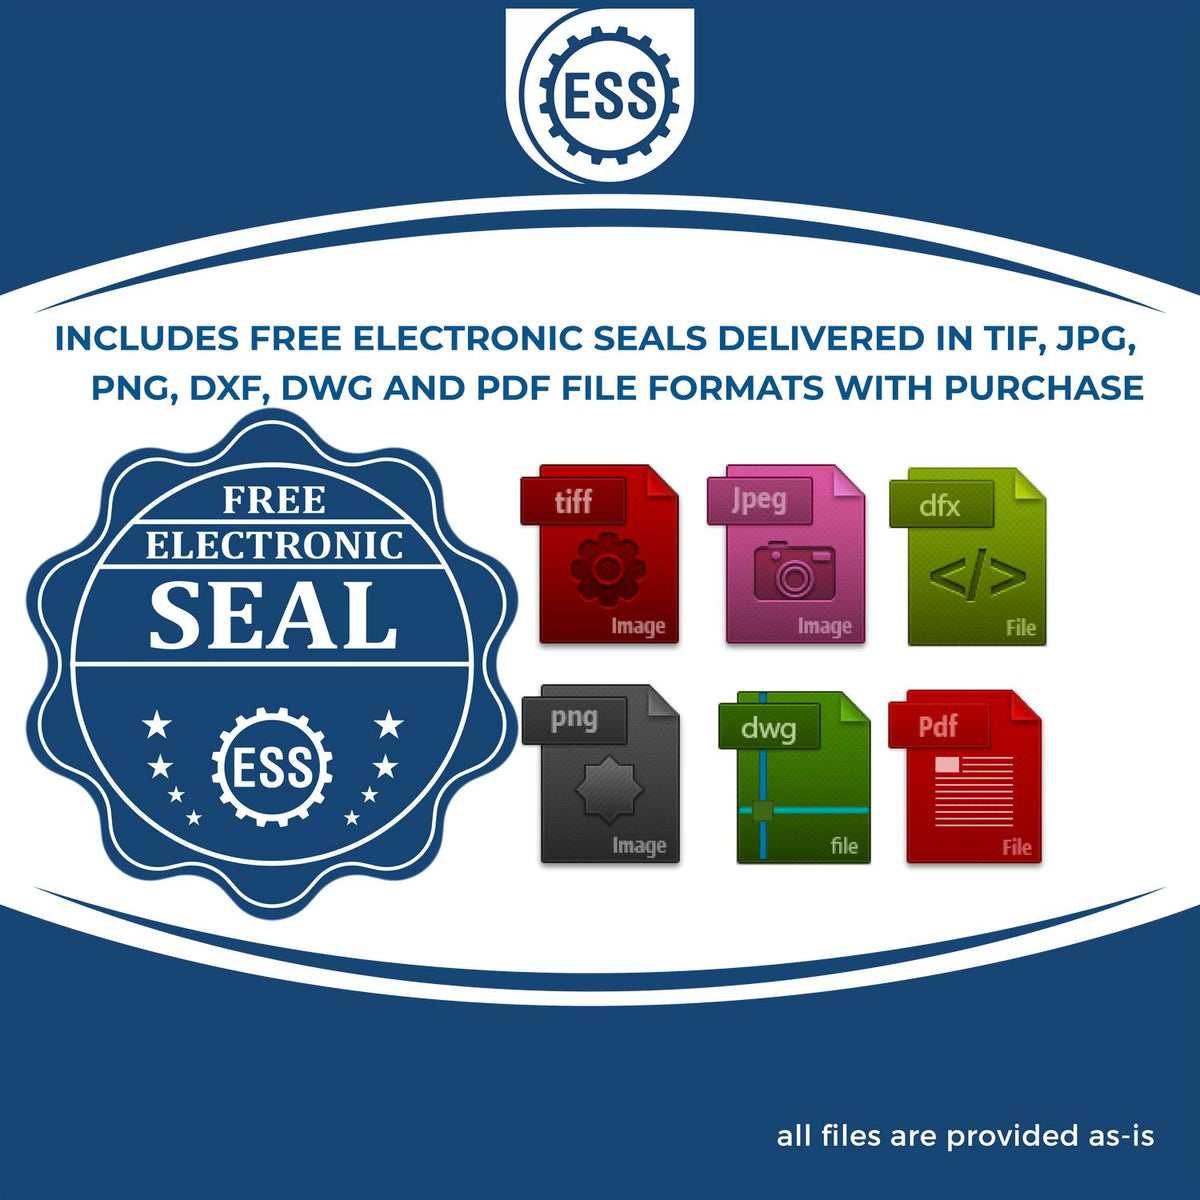 An infographic for the free electronic seal for the Premium MaxLight Pre-Inked Iowa Landscape Architectural Stamp illustrating the different file type icons such as DXF, DWG, TIF, JPG and PNG.